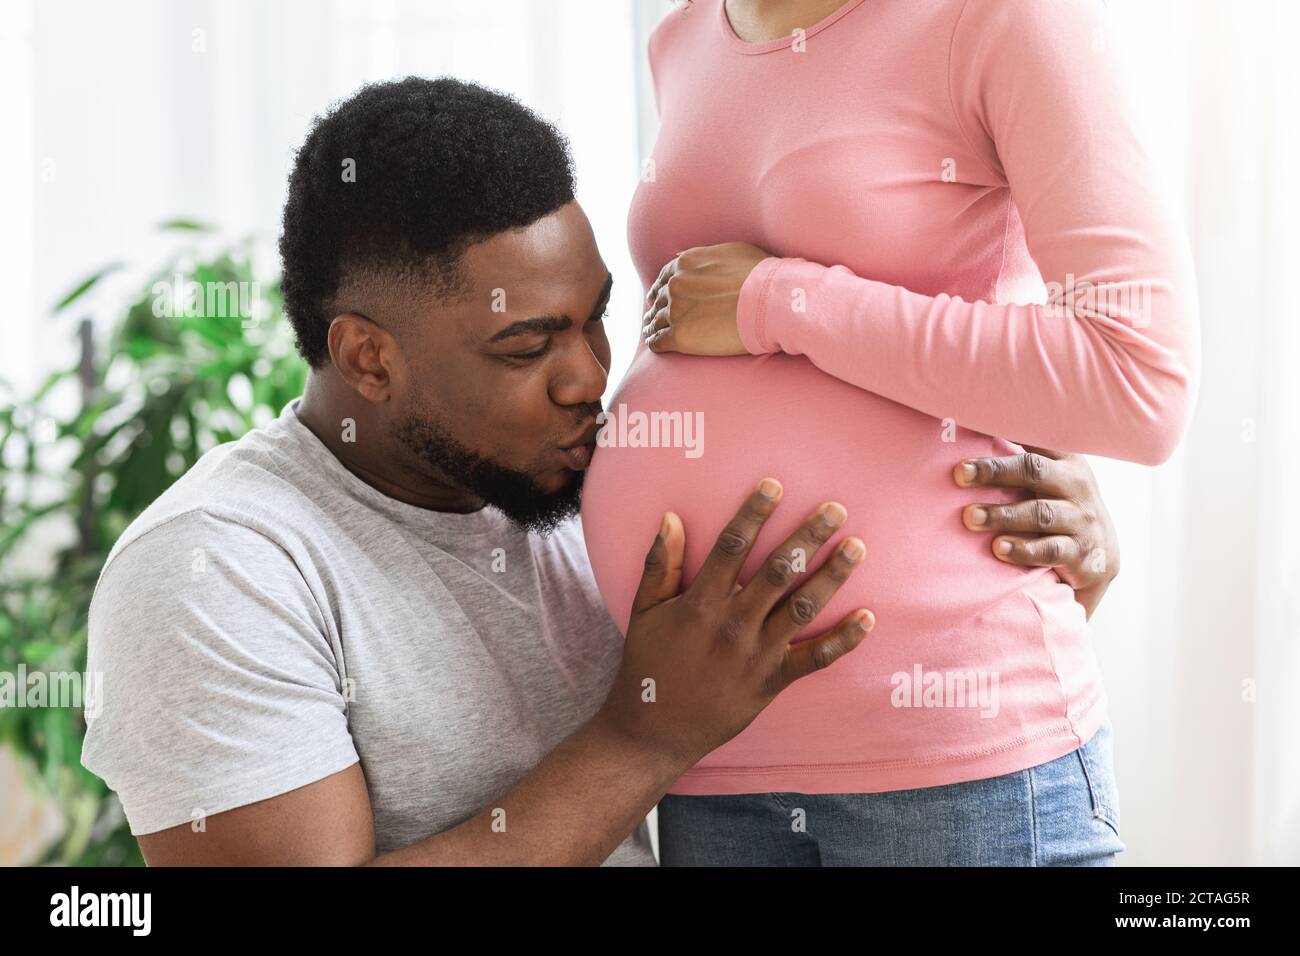 Wife Pregnant By Black